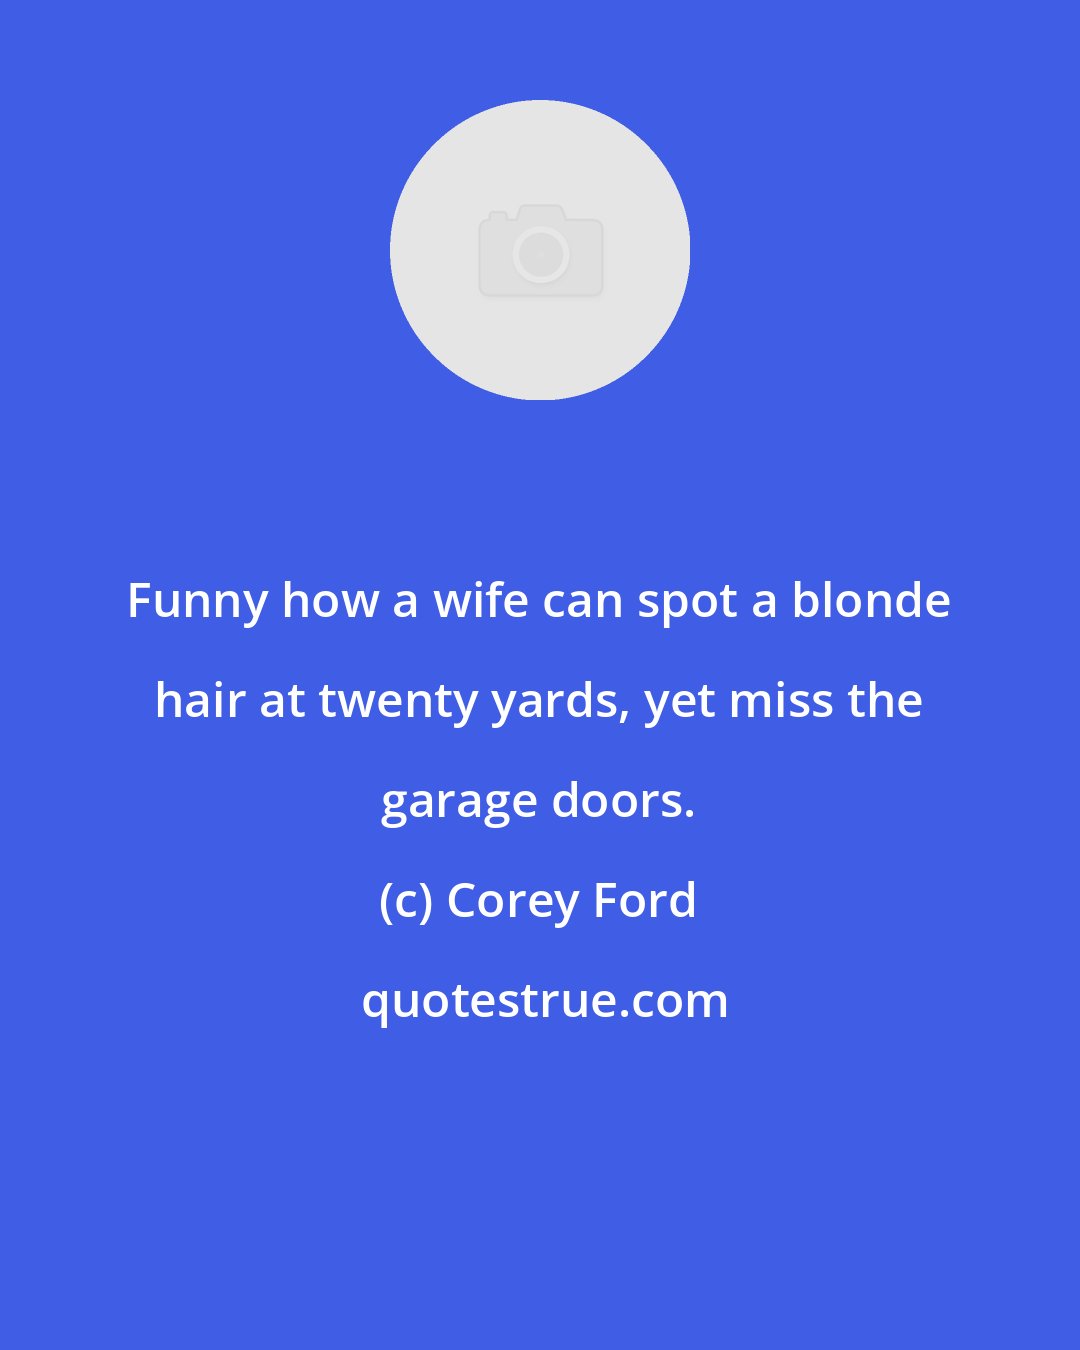 Corey Ford: Funny how a wife can spot a blonde hair at twenty yards, yet miss the garage doors.